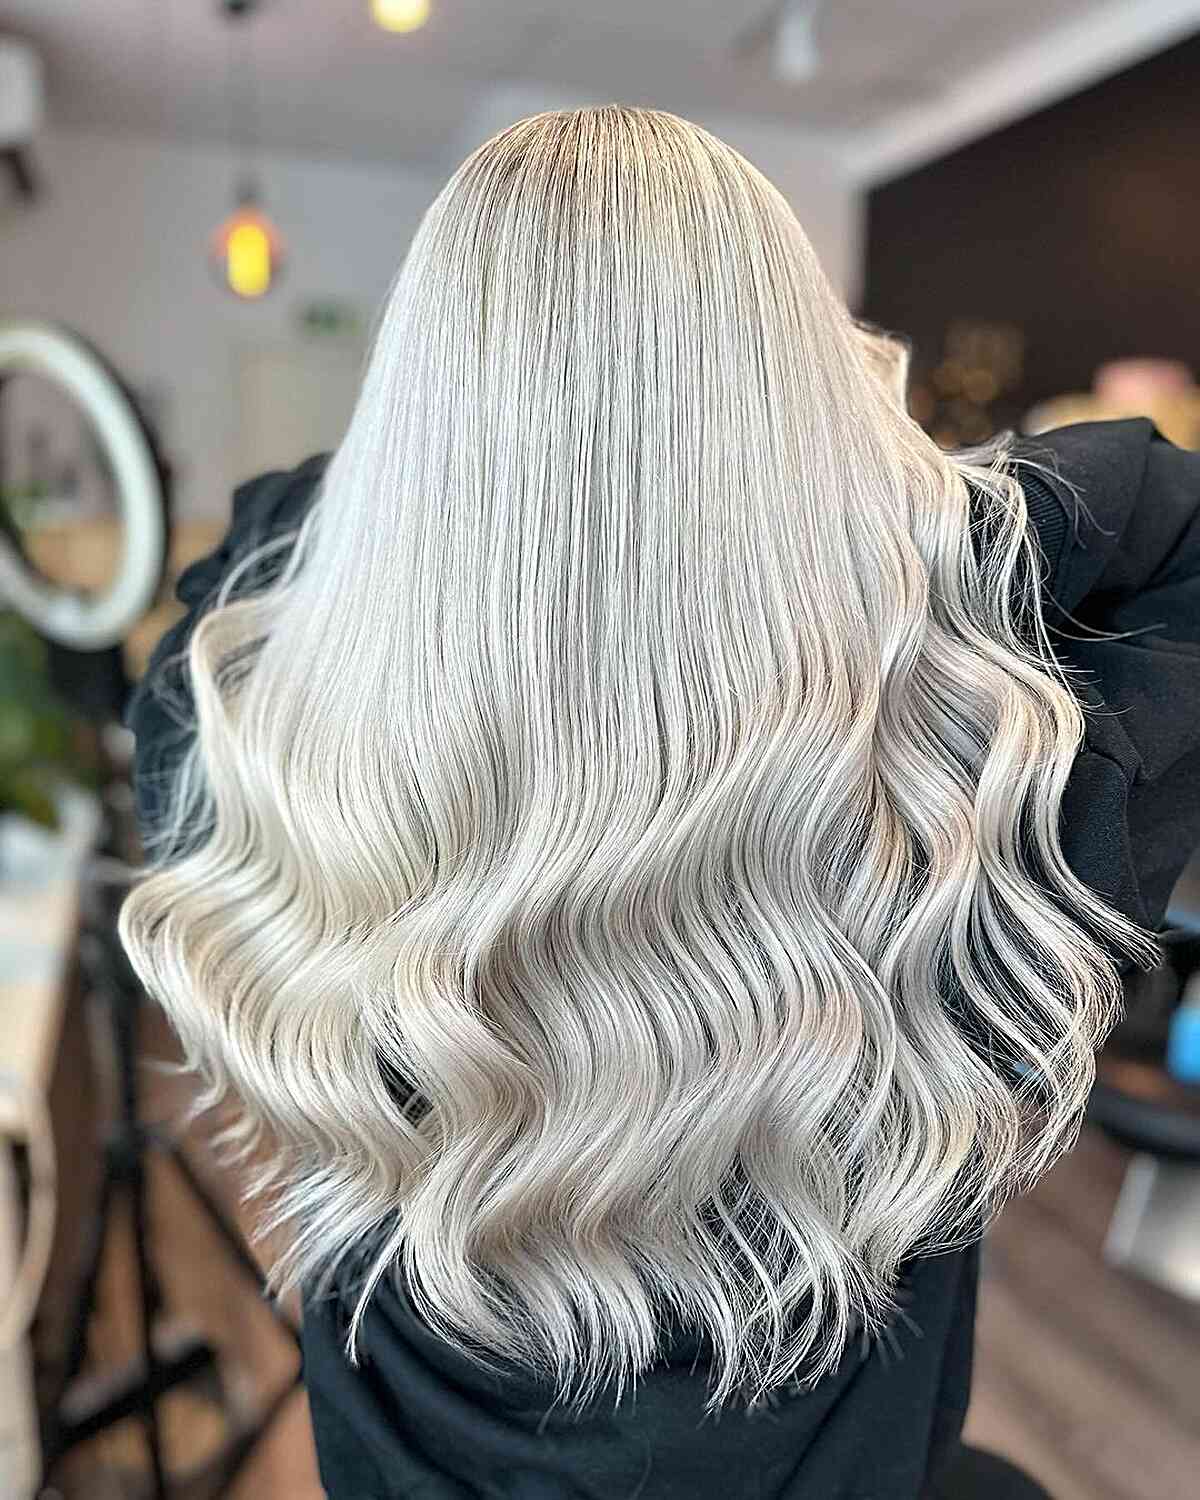 Long Icy Platinum Wavy Hair Color